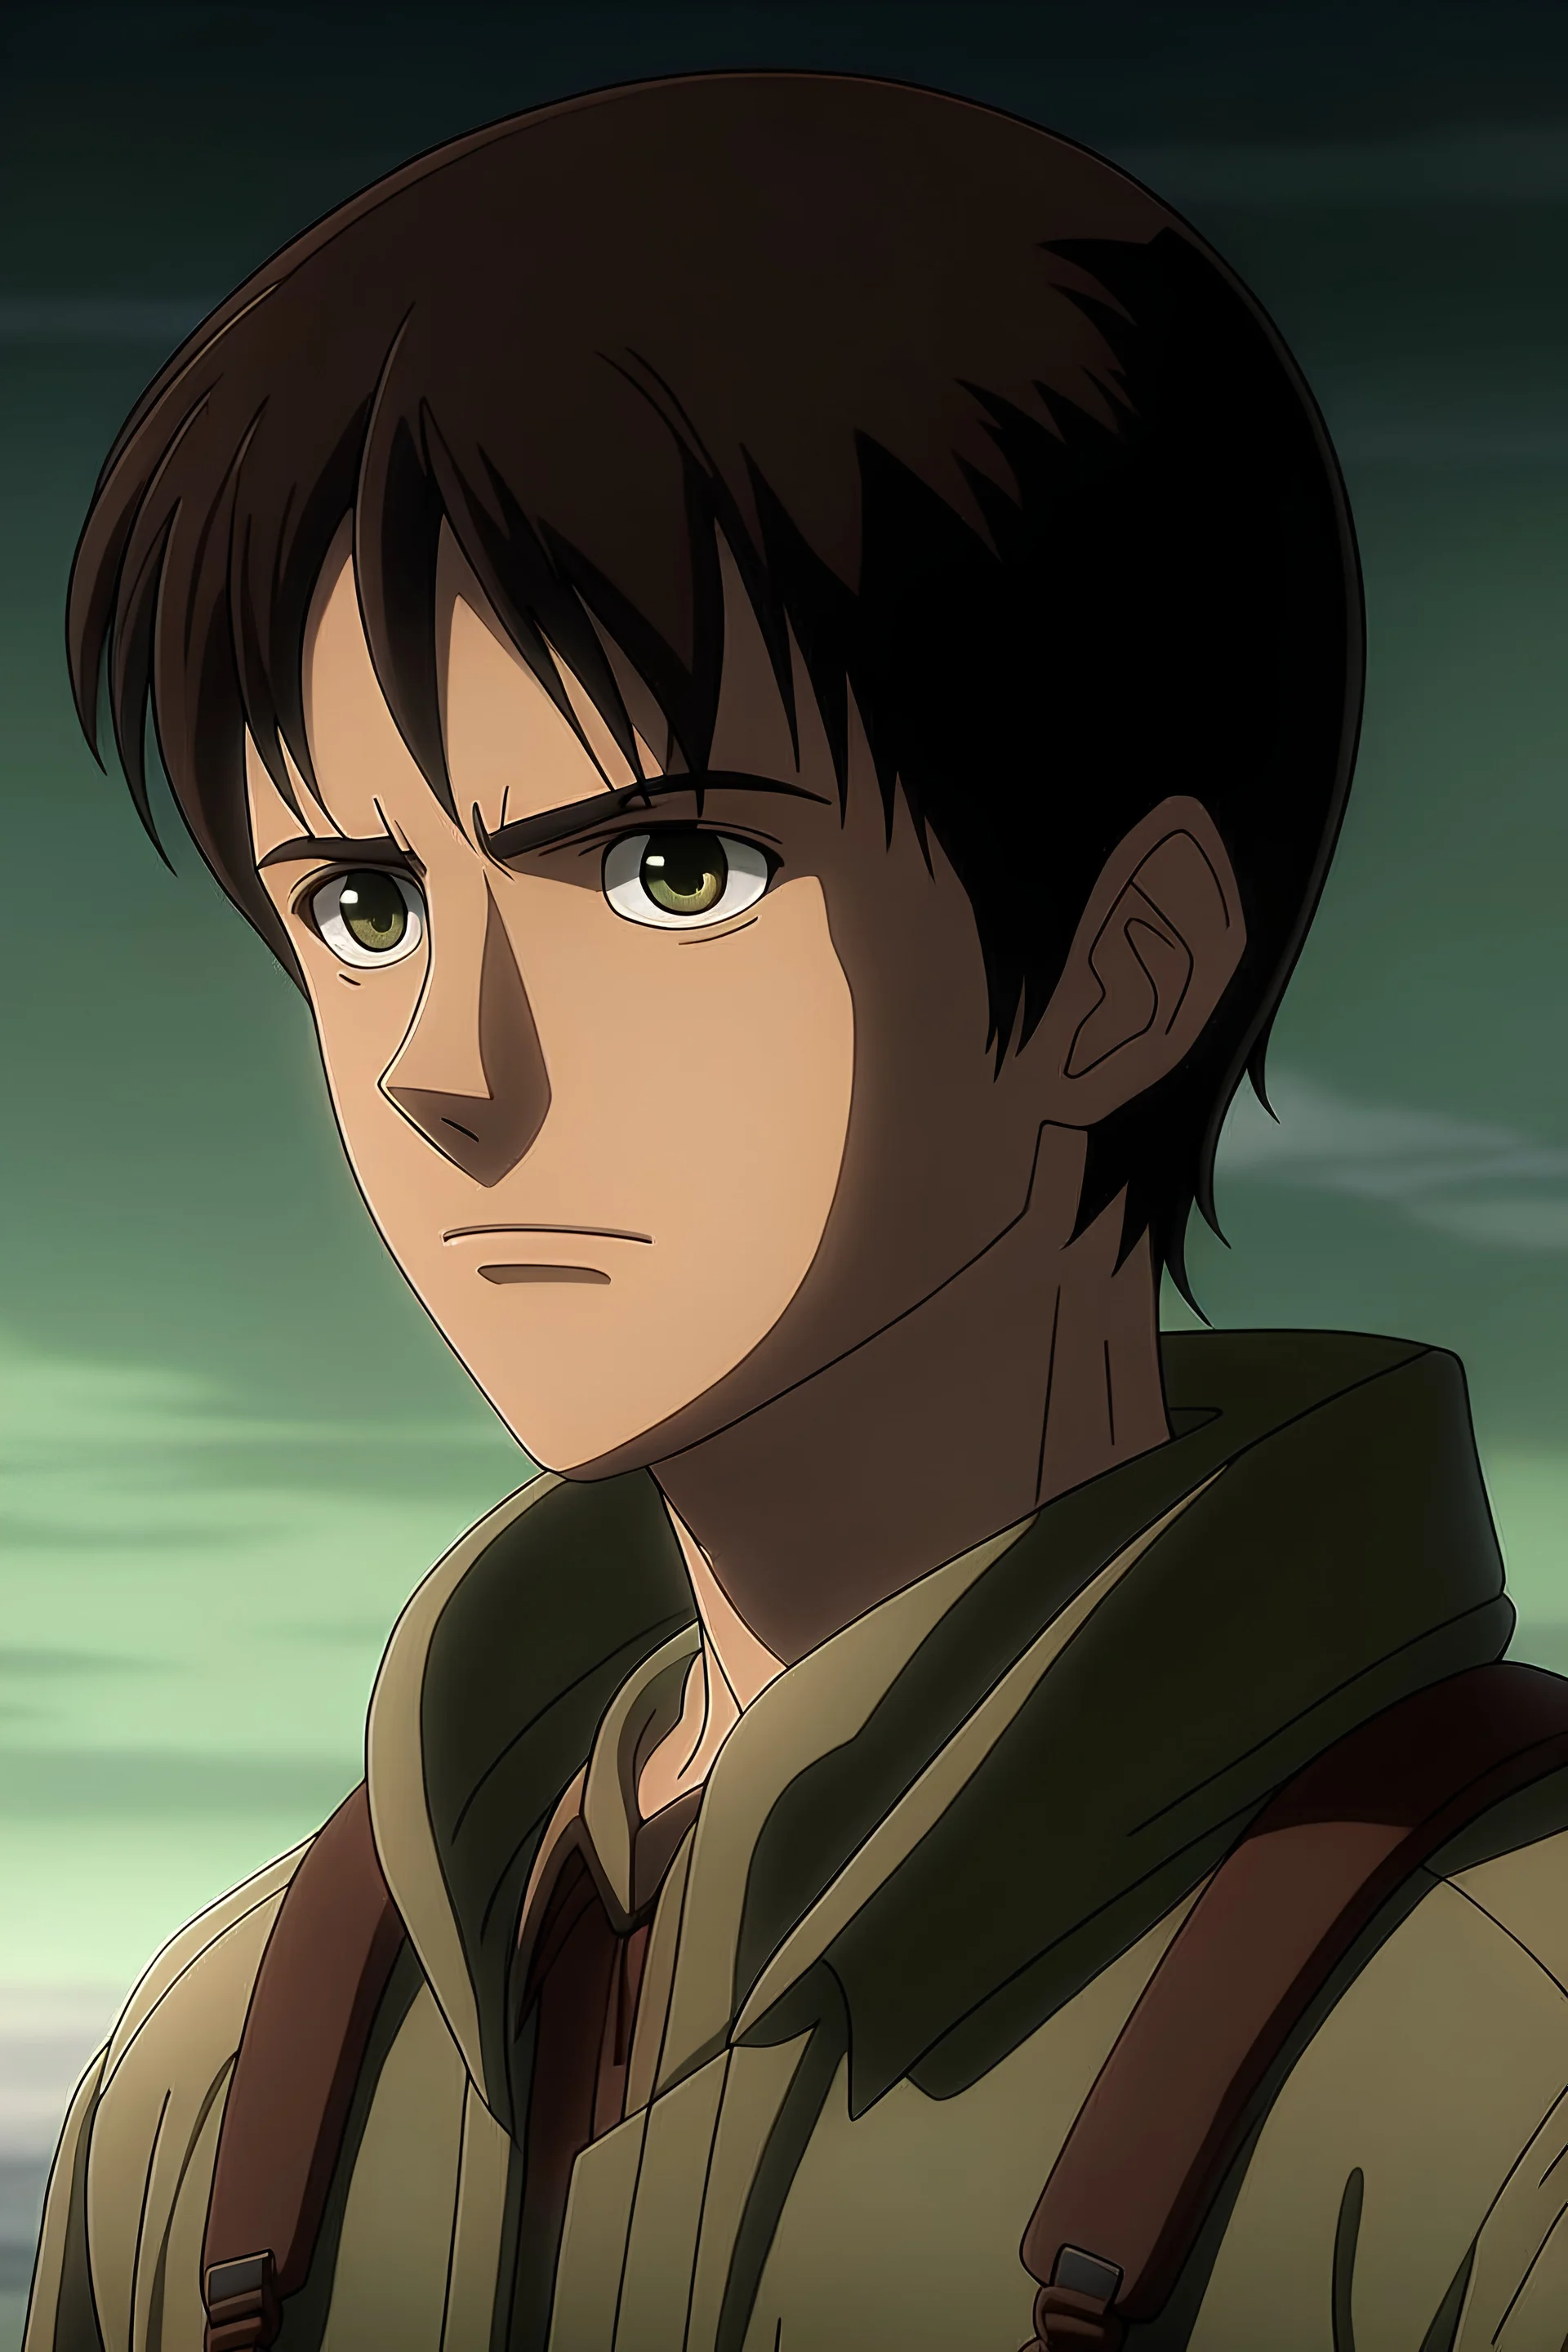 Attack on Titan screencap of a young male with small body, short, Black straight short hair skin tone is black, eye color is black , face shape is armin-like face, Scenery is (beautiful, intense, warm, nighttime, etc.). He is wearing a (outfit of choice). (WIT/MAPPA) Studios (season 1, season 2, season 3, season 4) screencap.